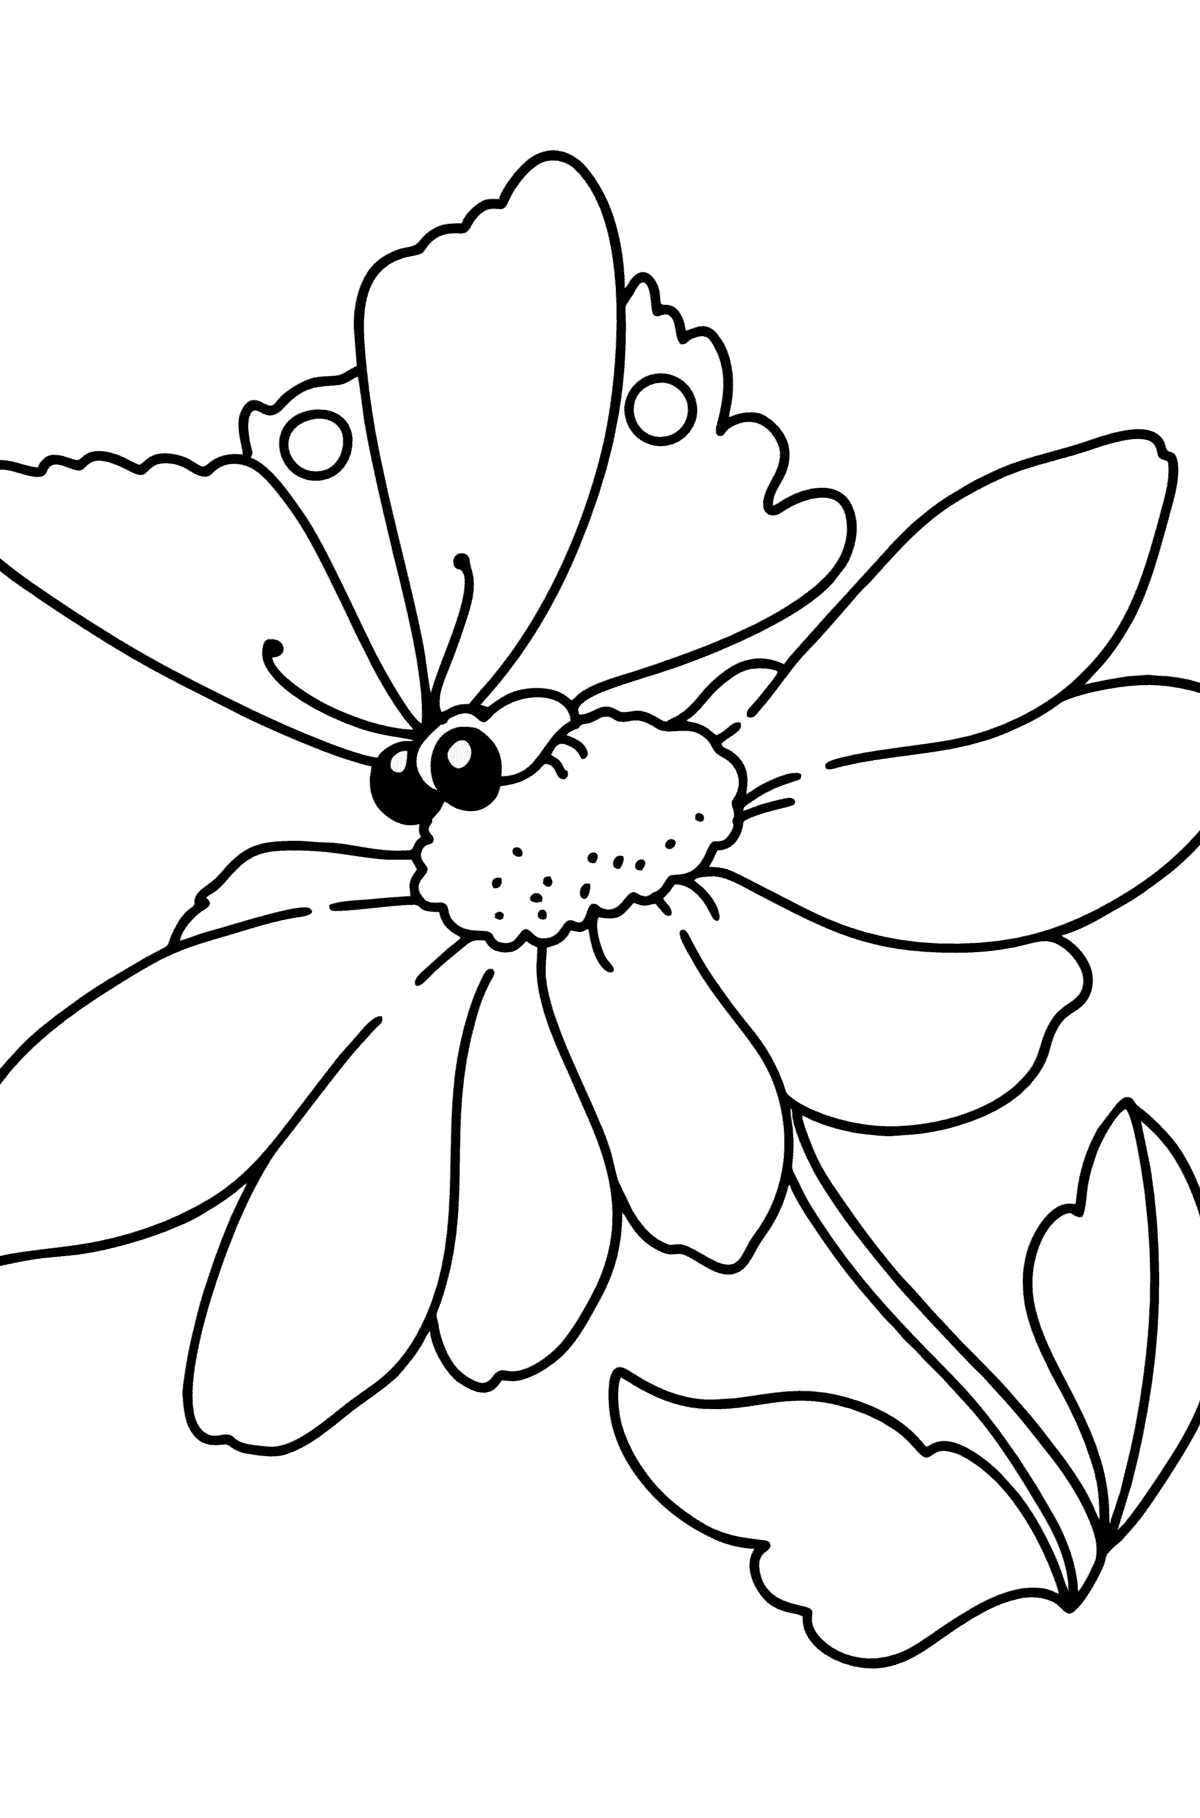 Summer Coloring page - Flowers and Butterfly - Coloring Pages for Kids